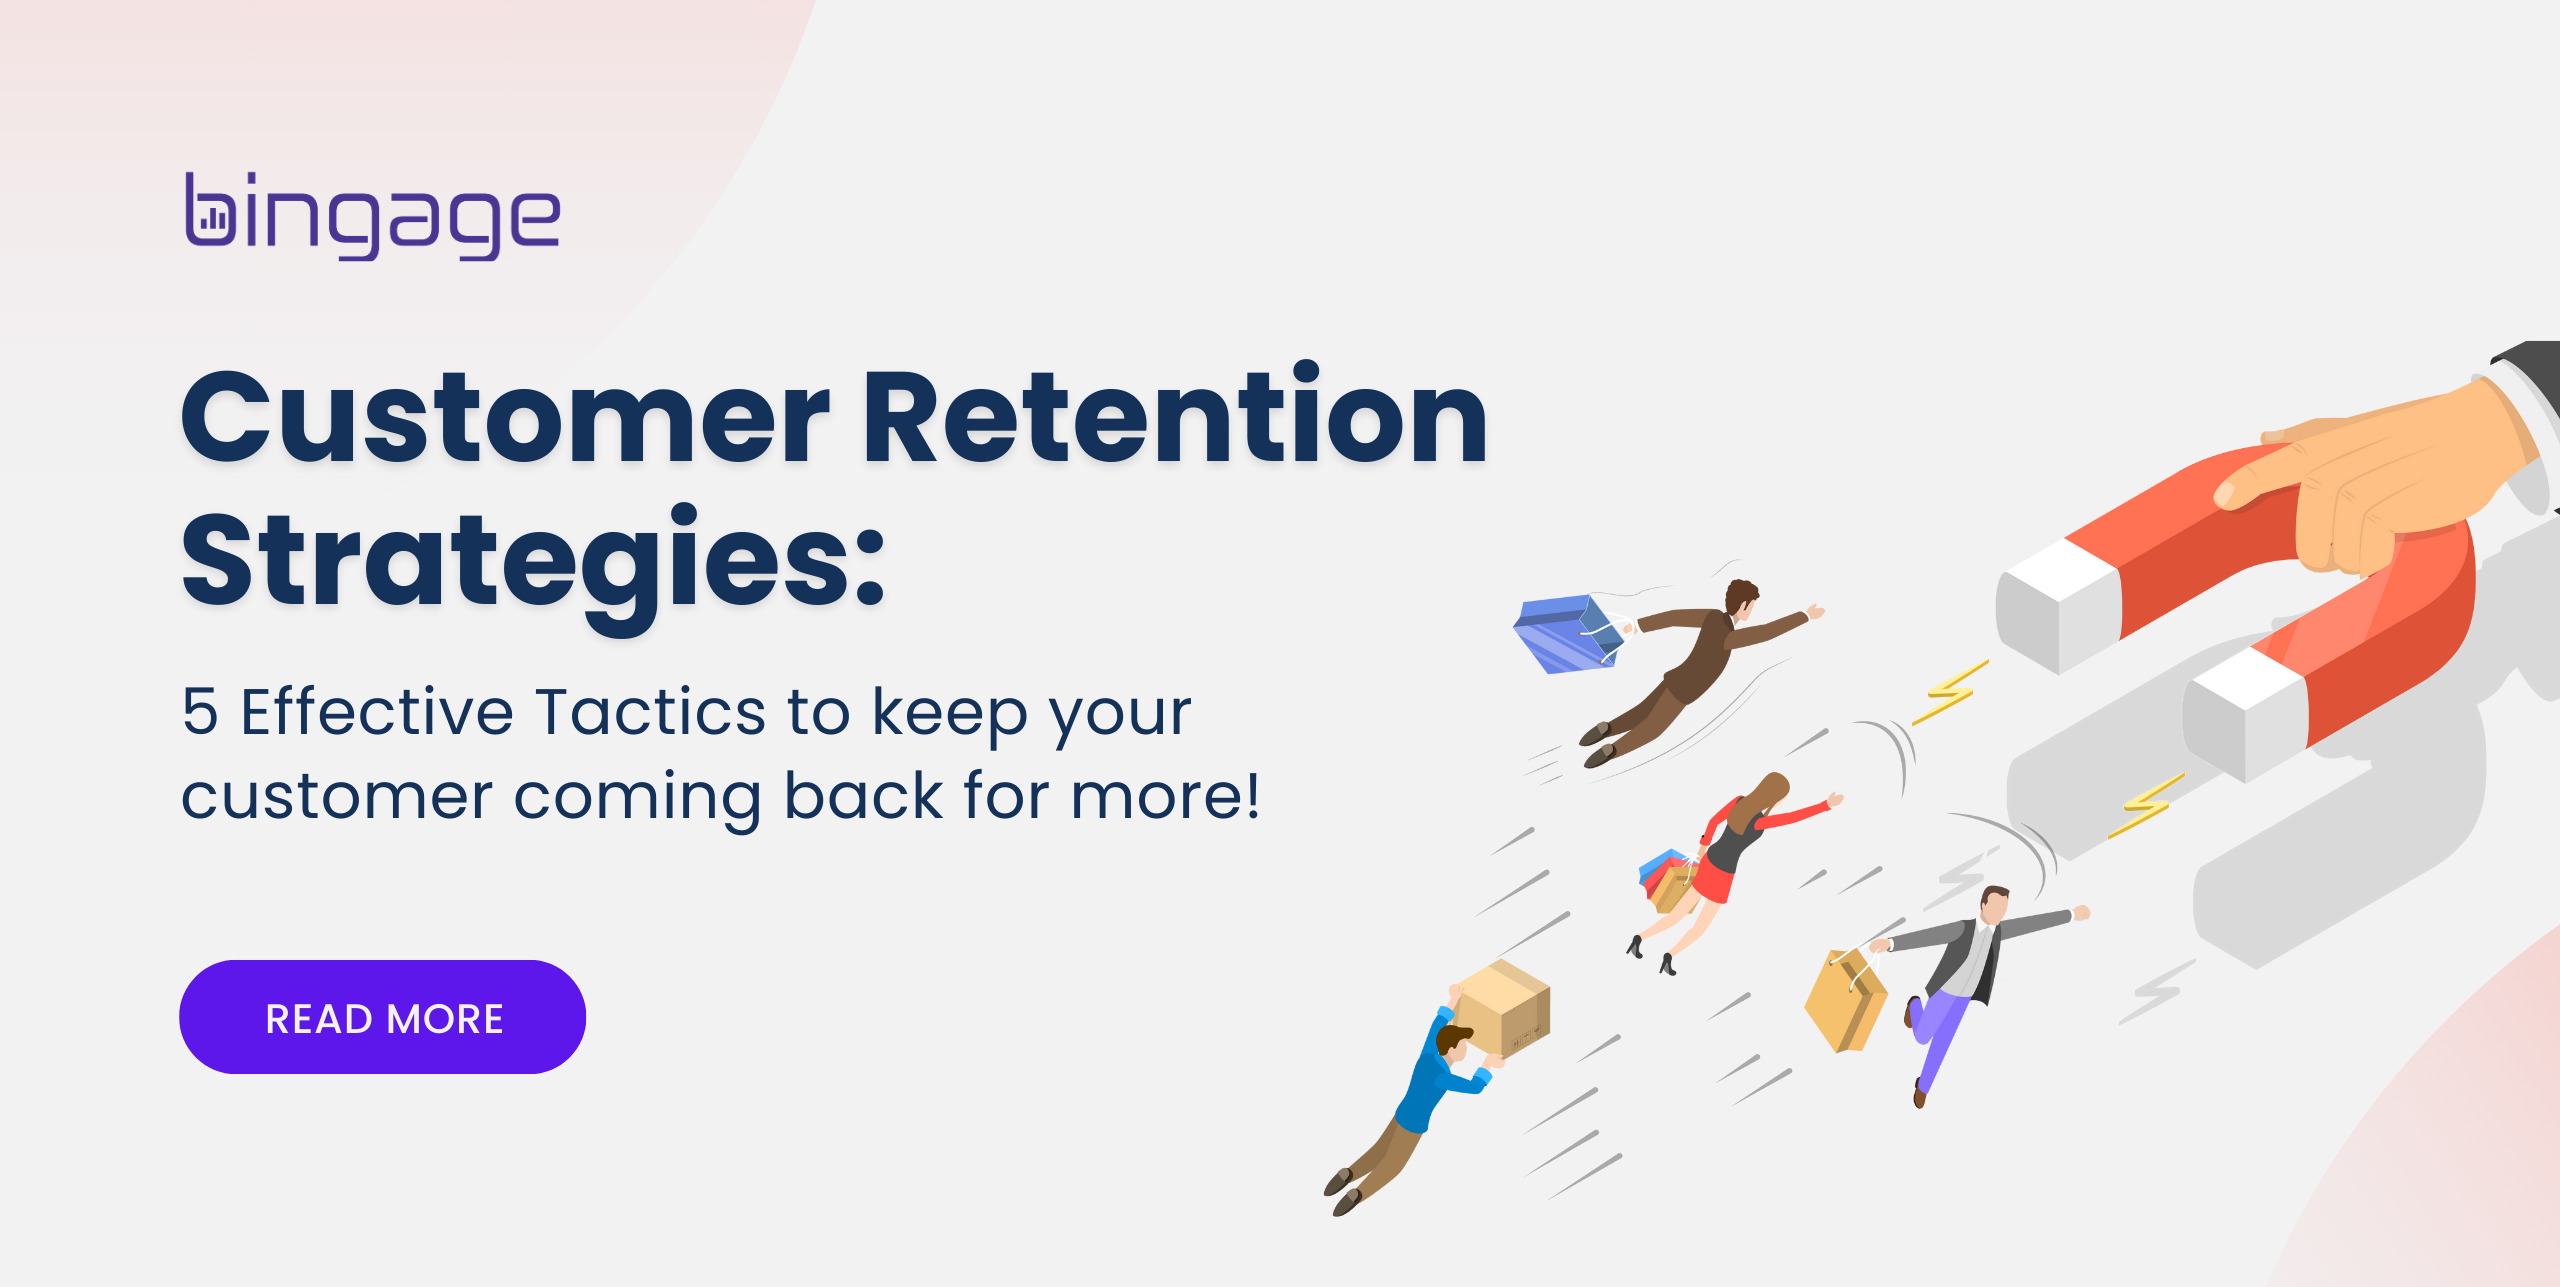 The Ultimate Guide to Customer Retention: How to Keep your customer coming back for more.